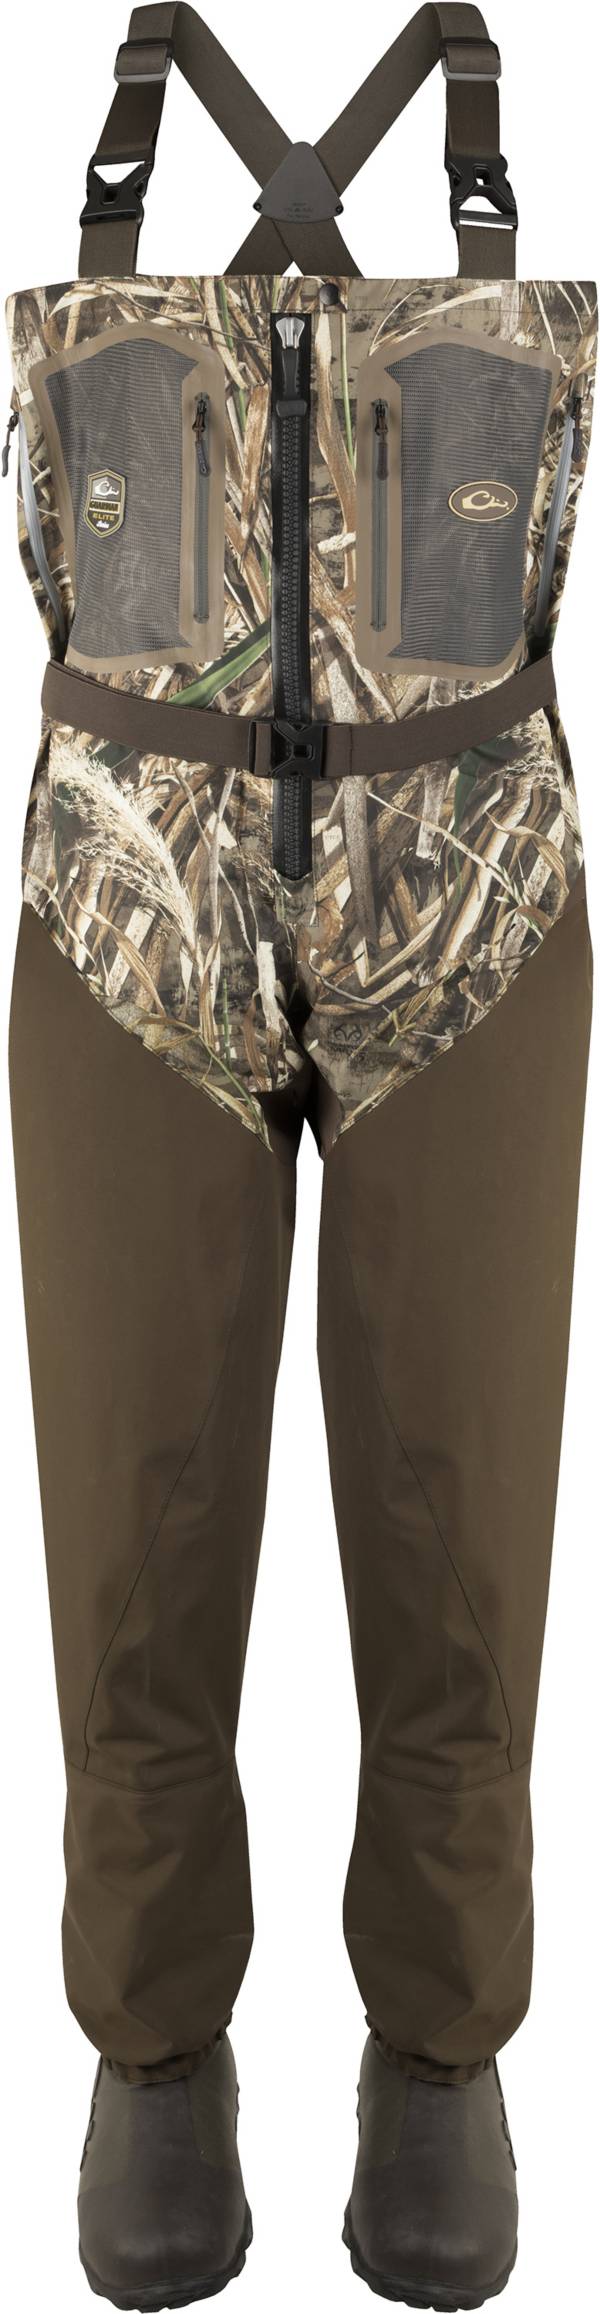 Drake Waterfowl Guardian Elite 4-Layer Chest Waders with Tear-Away Liner product image